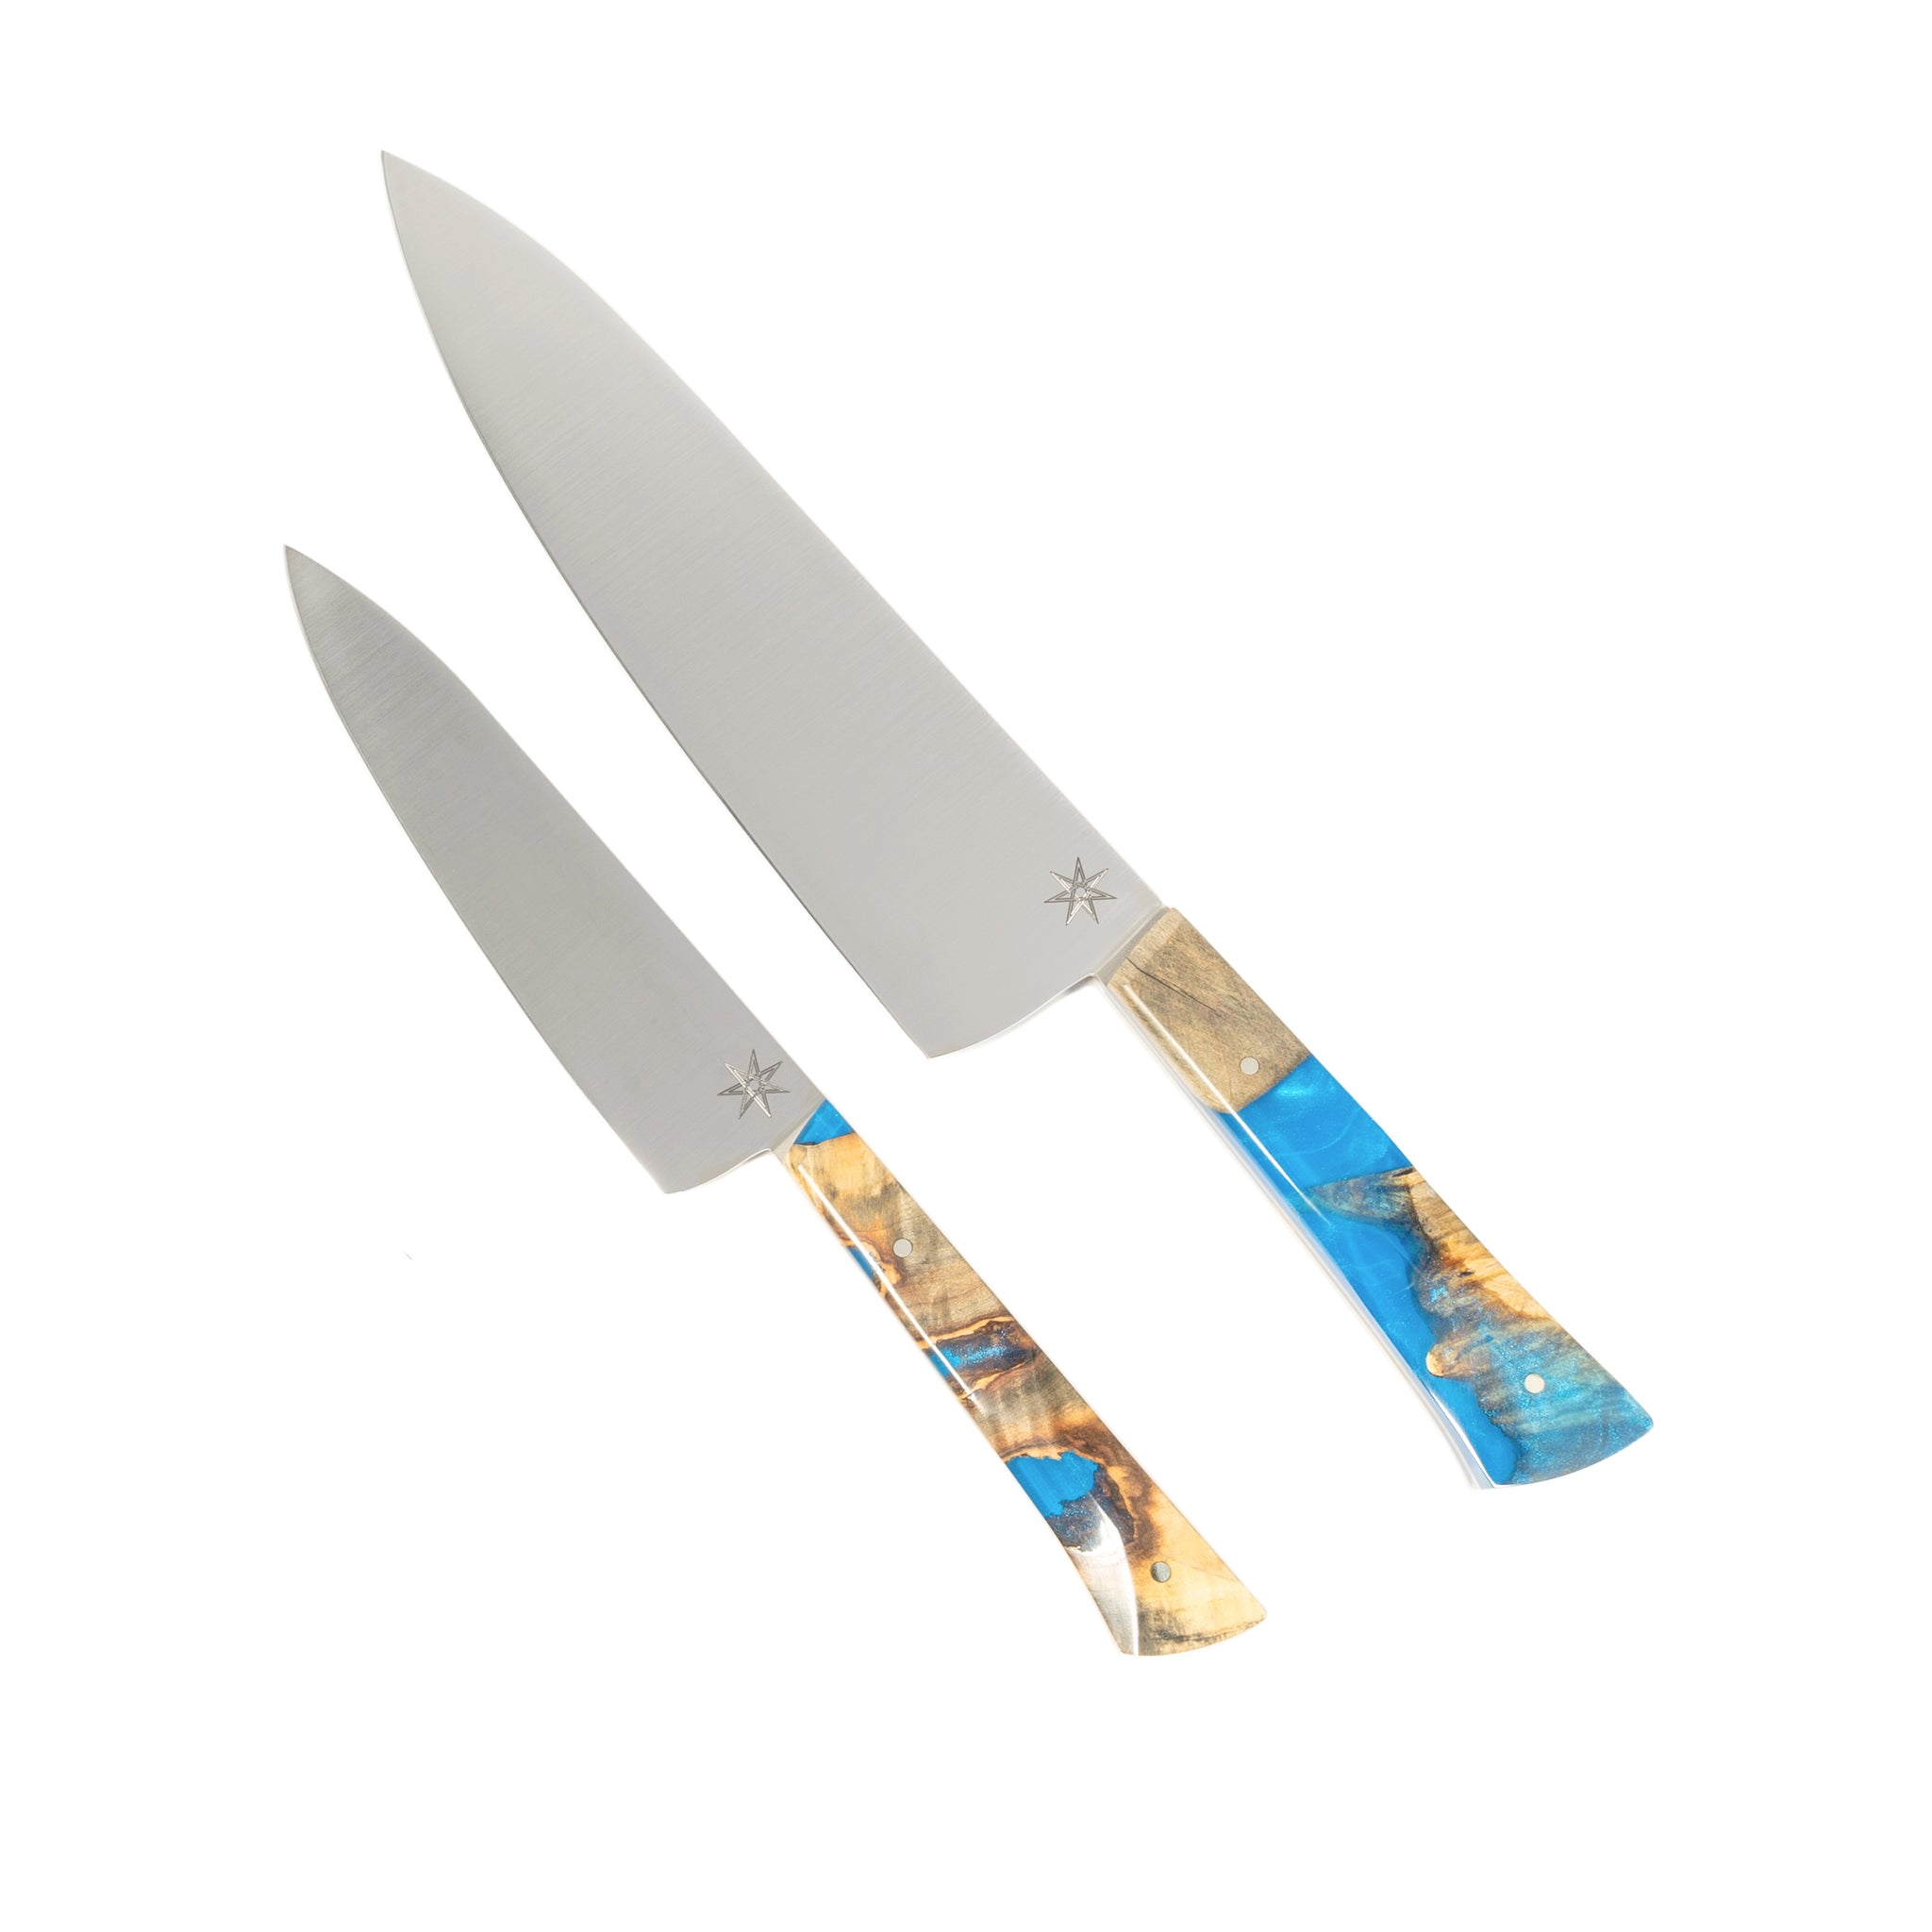 Town Cutler Tahoe Bliss Commis Knife set with two kitchen knives, utility knife and chef knife.